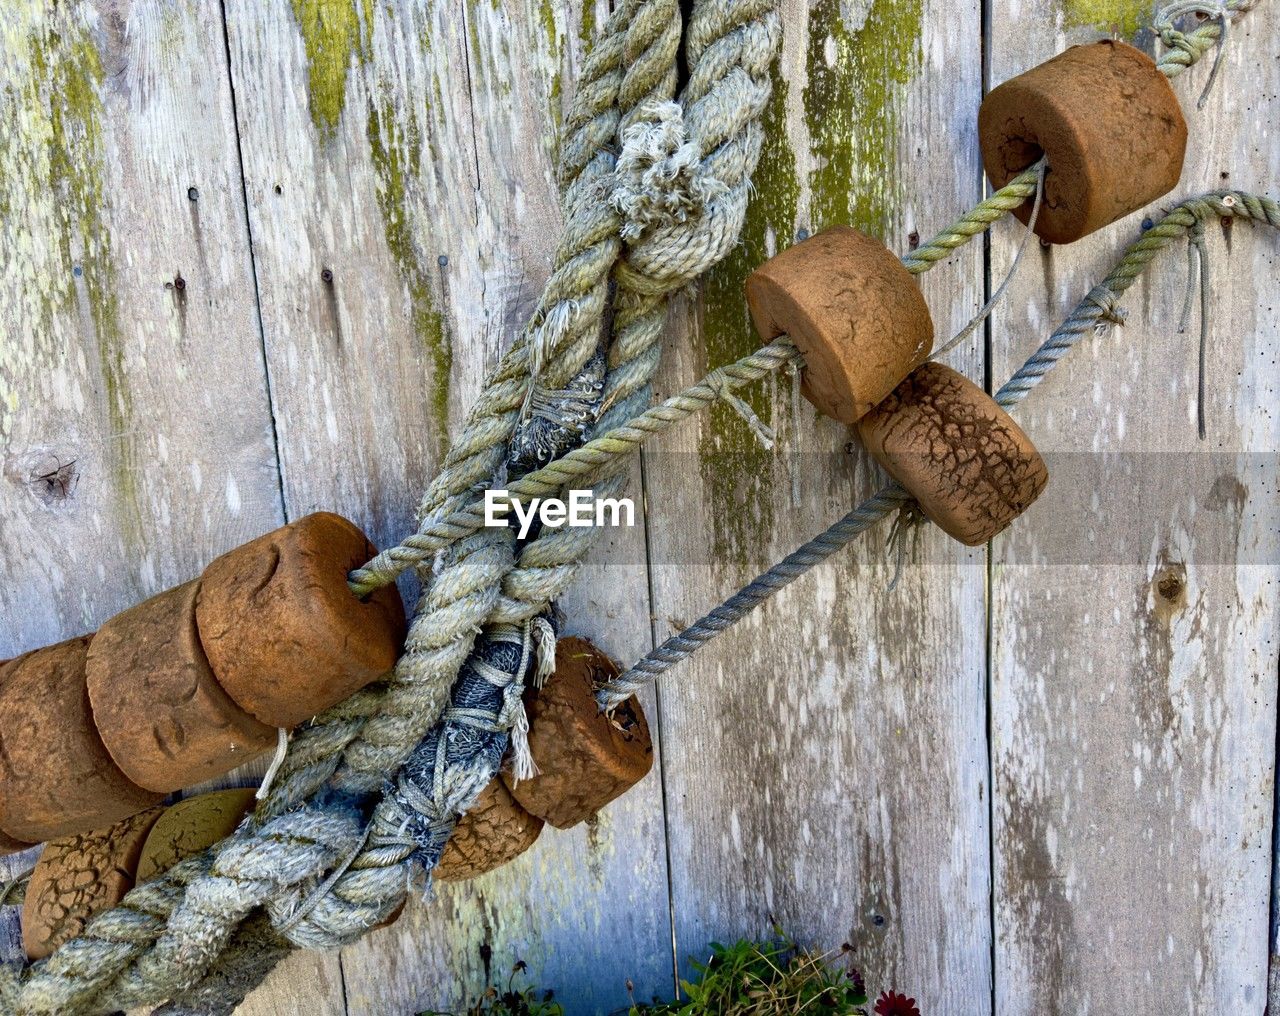 wood, rope, no people, day, tree, plant, nature, branch, outdoors, hanging, tree trunk, close-up, trunk